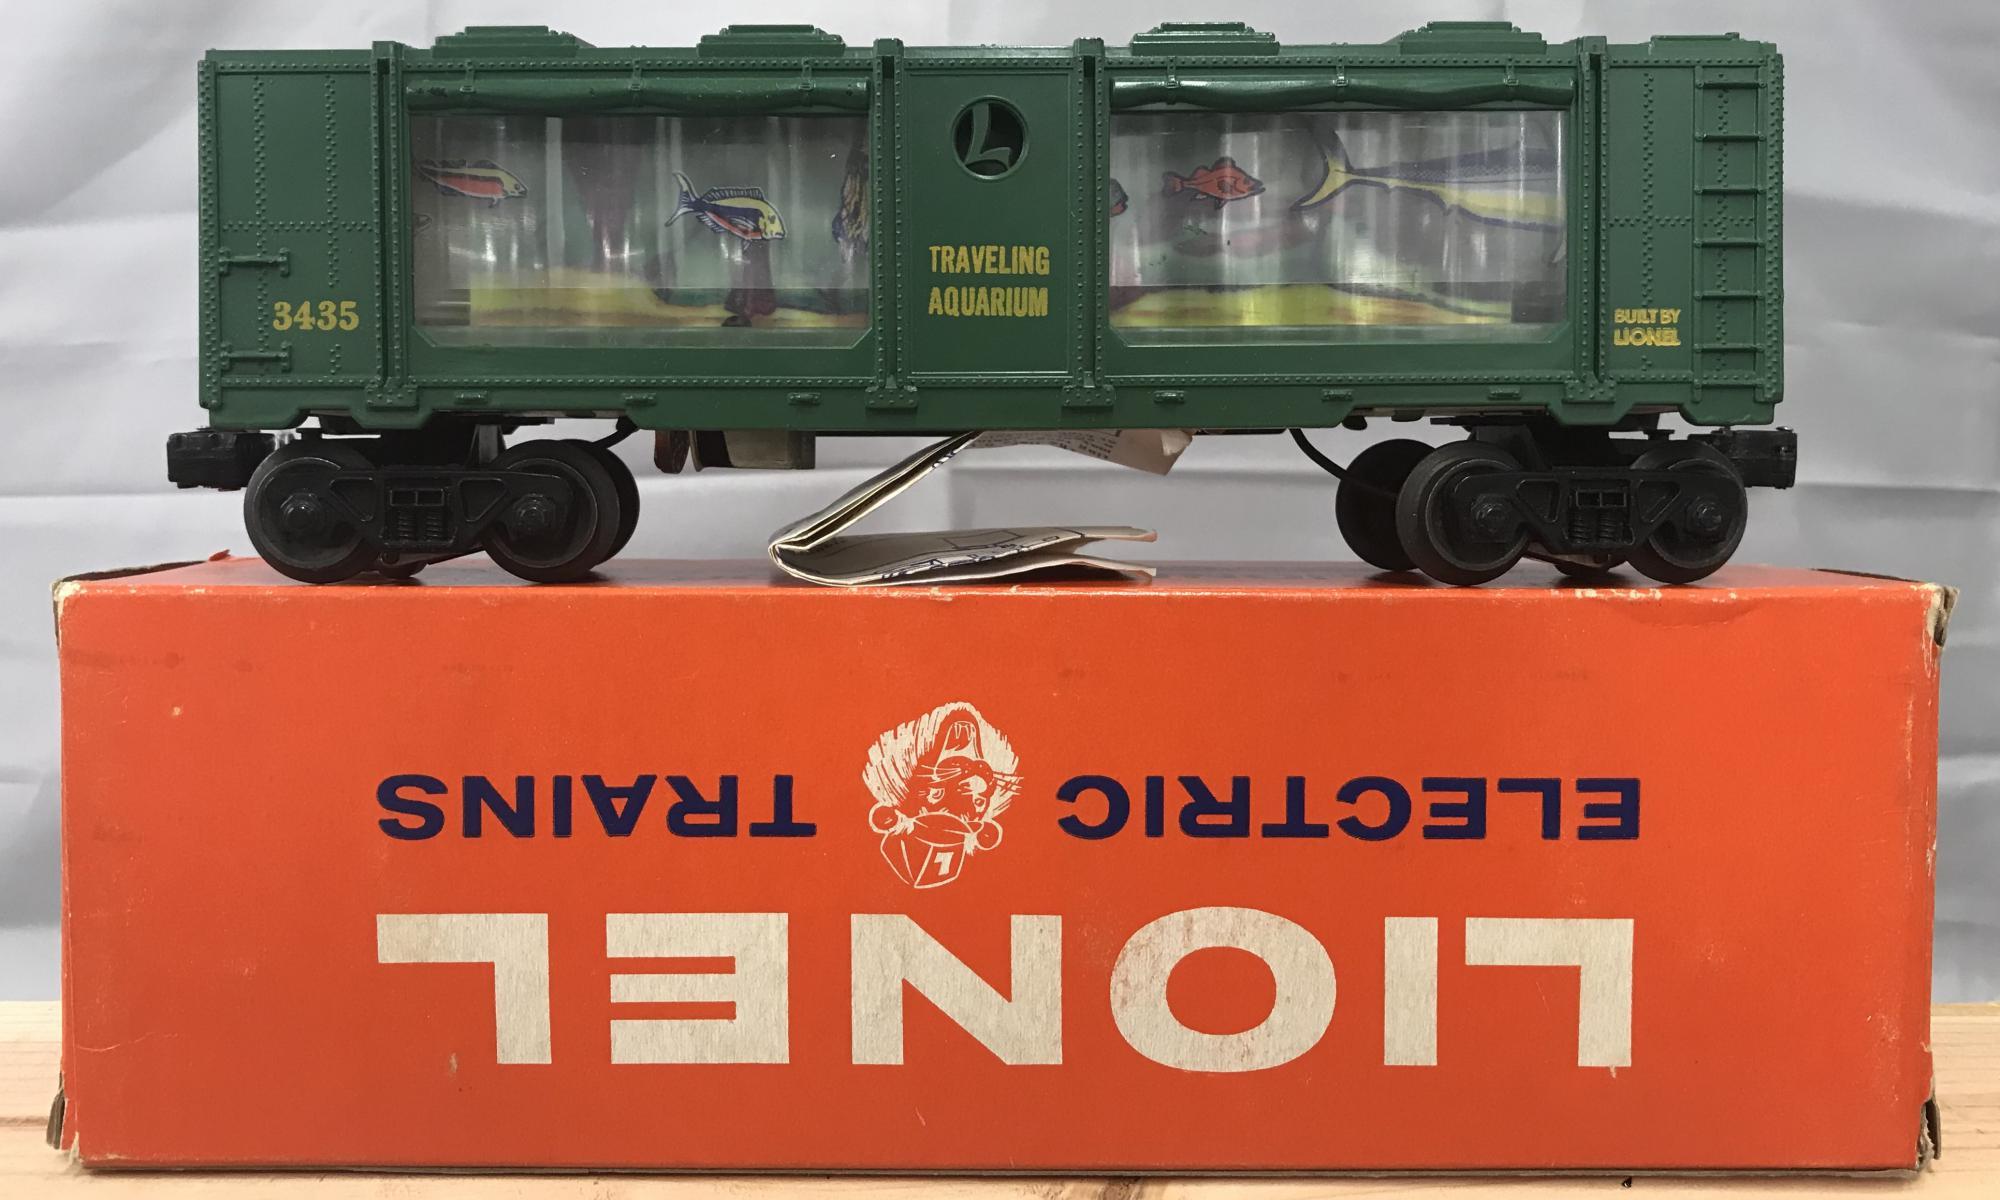 LN Boxed Lionel 3435 & 6822 Freight Cars